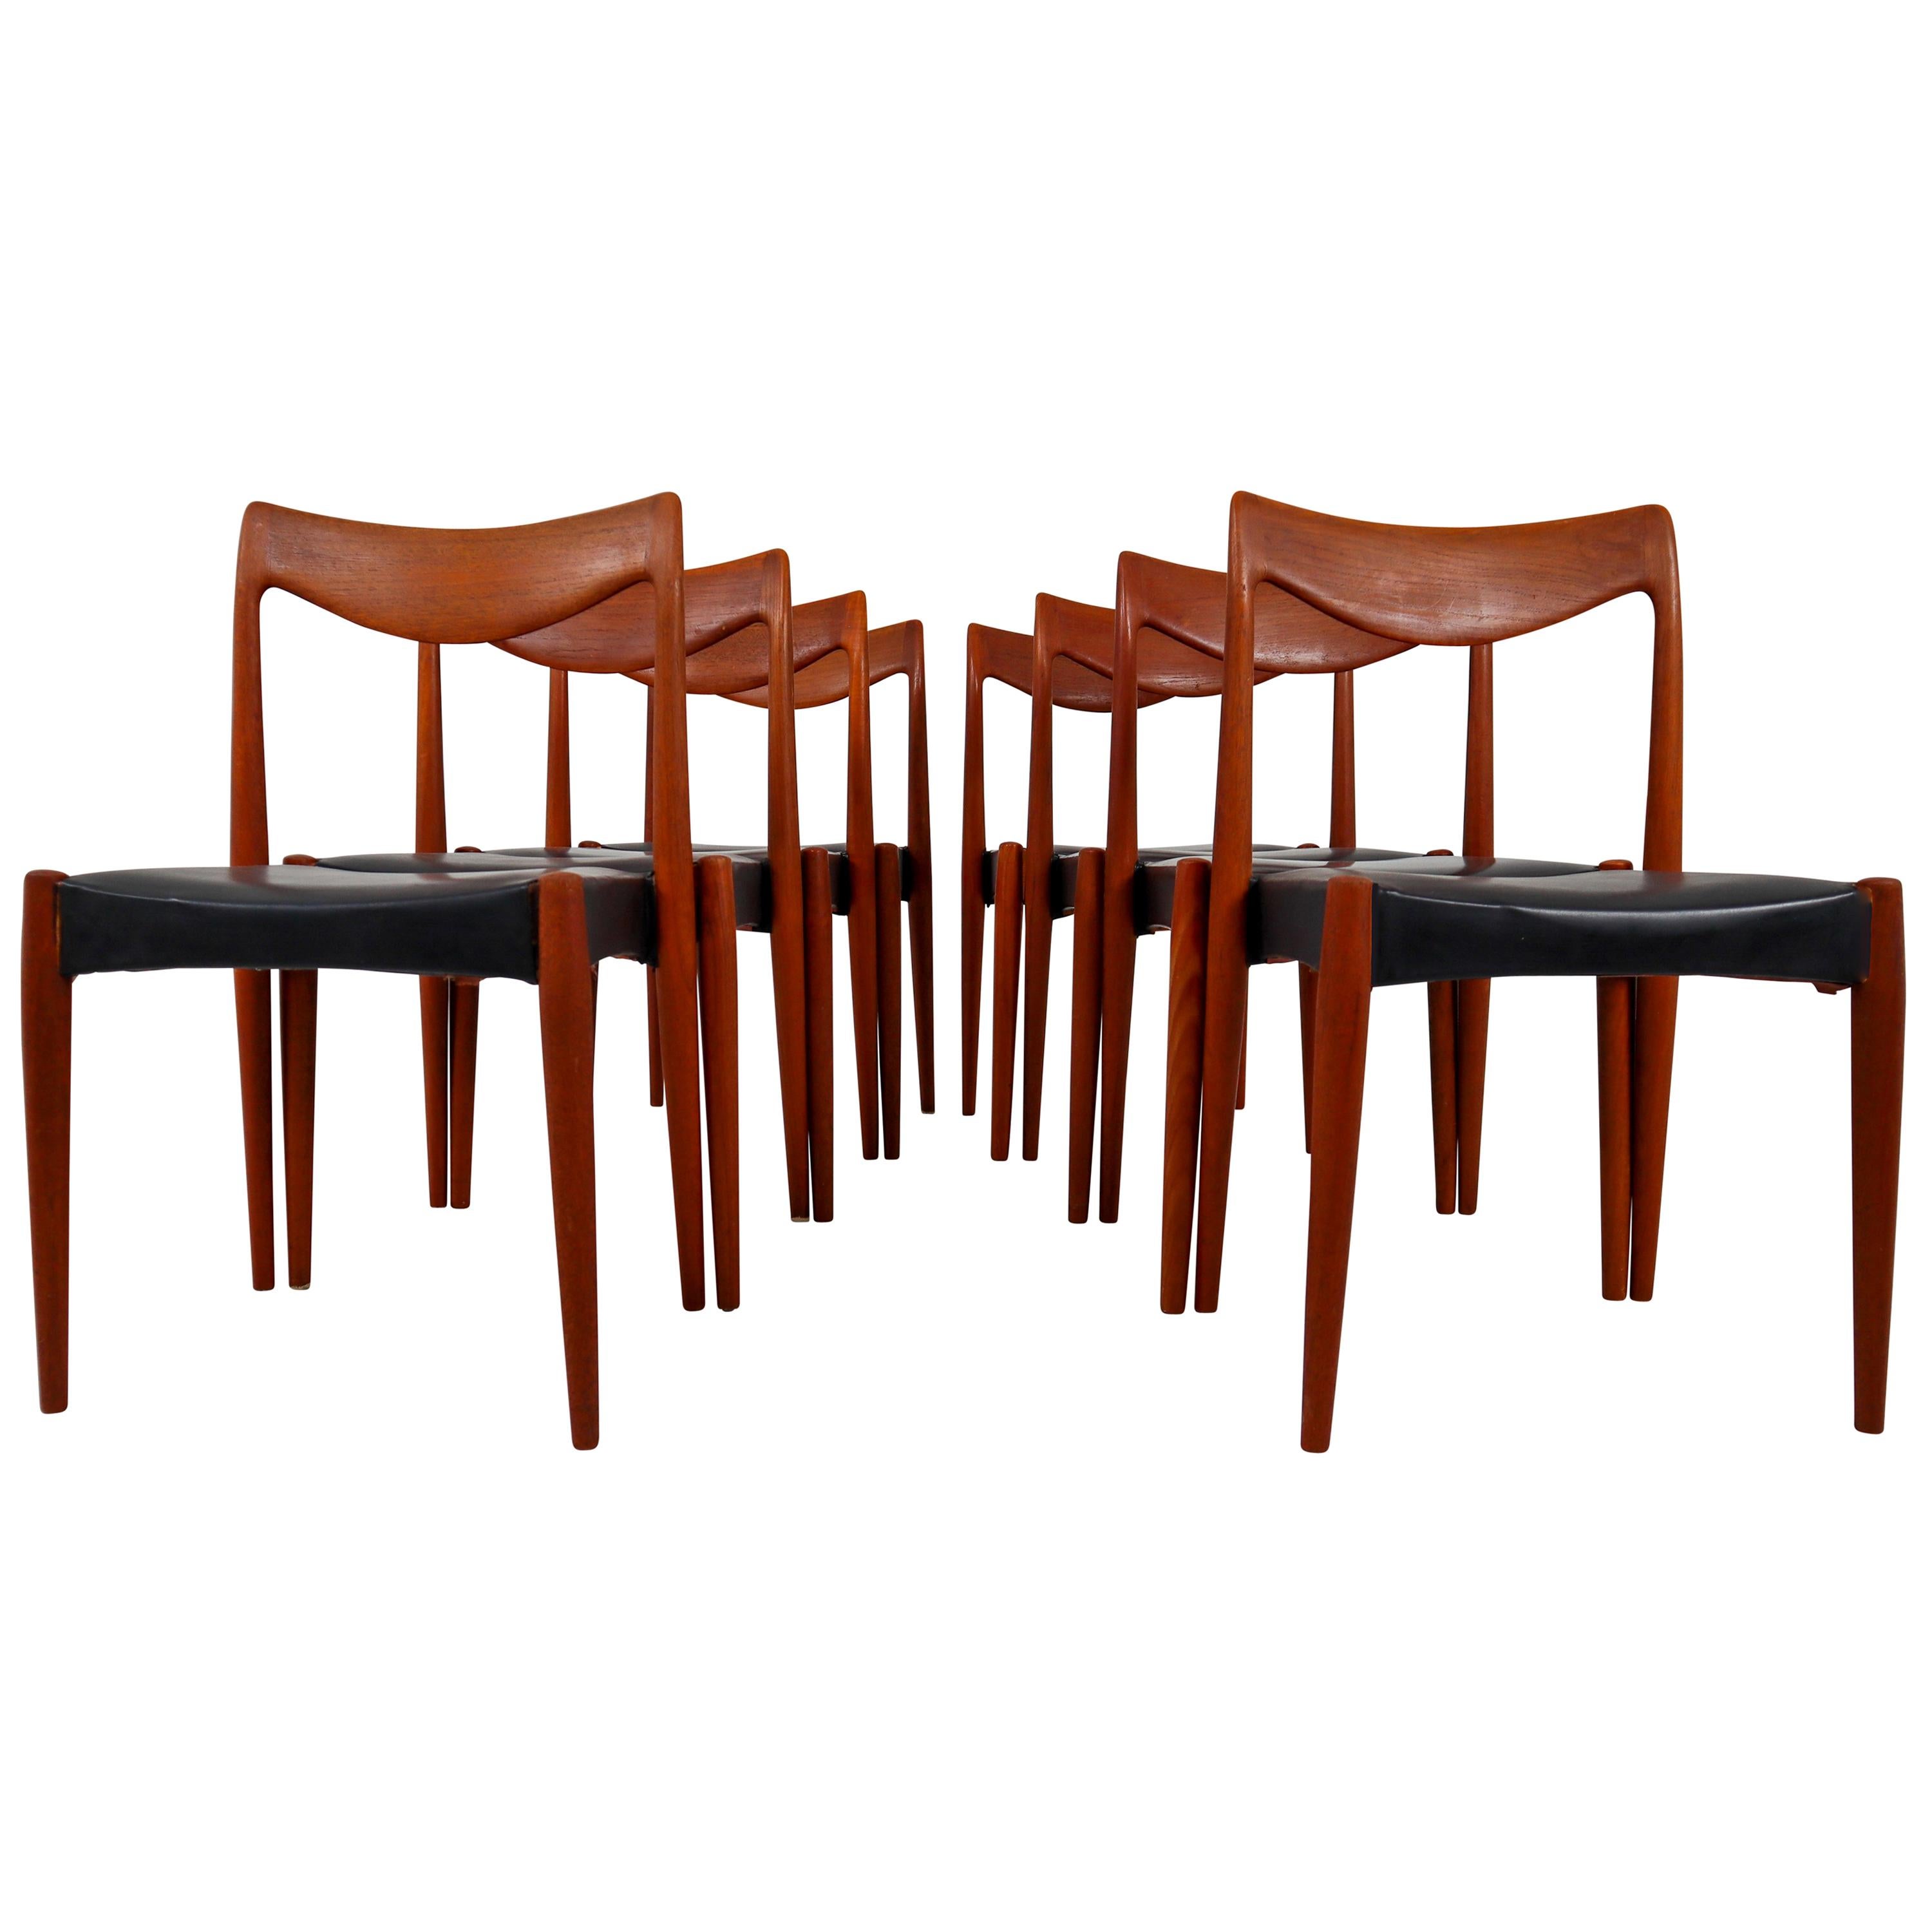 Set of Eight Teak "Bambi" Chairs by Rolf Rastad & Adolf Relling, Norway, 1960